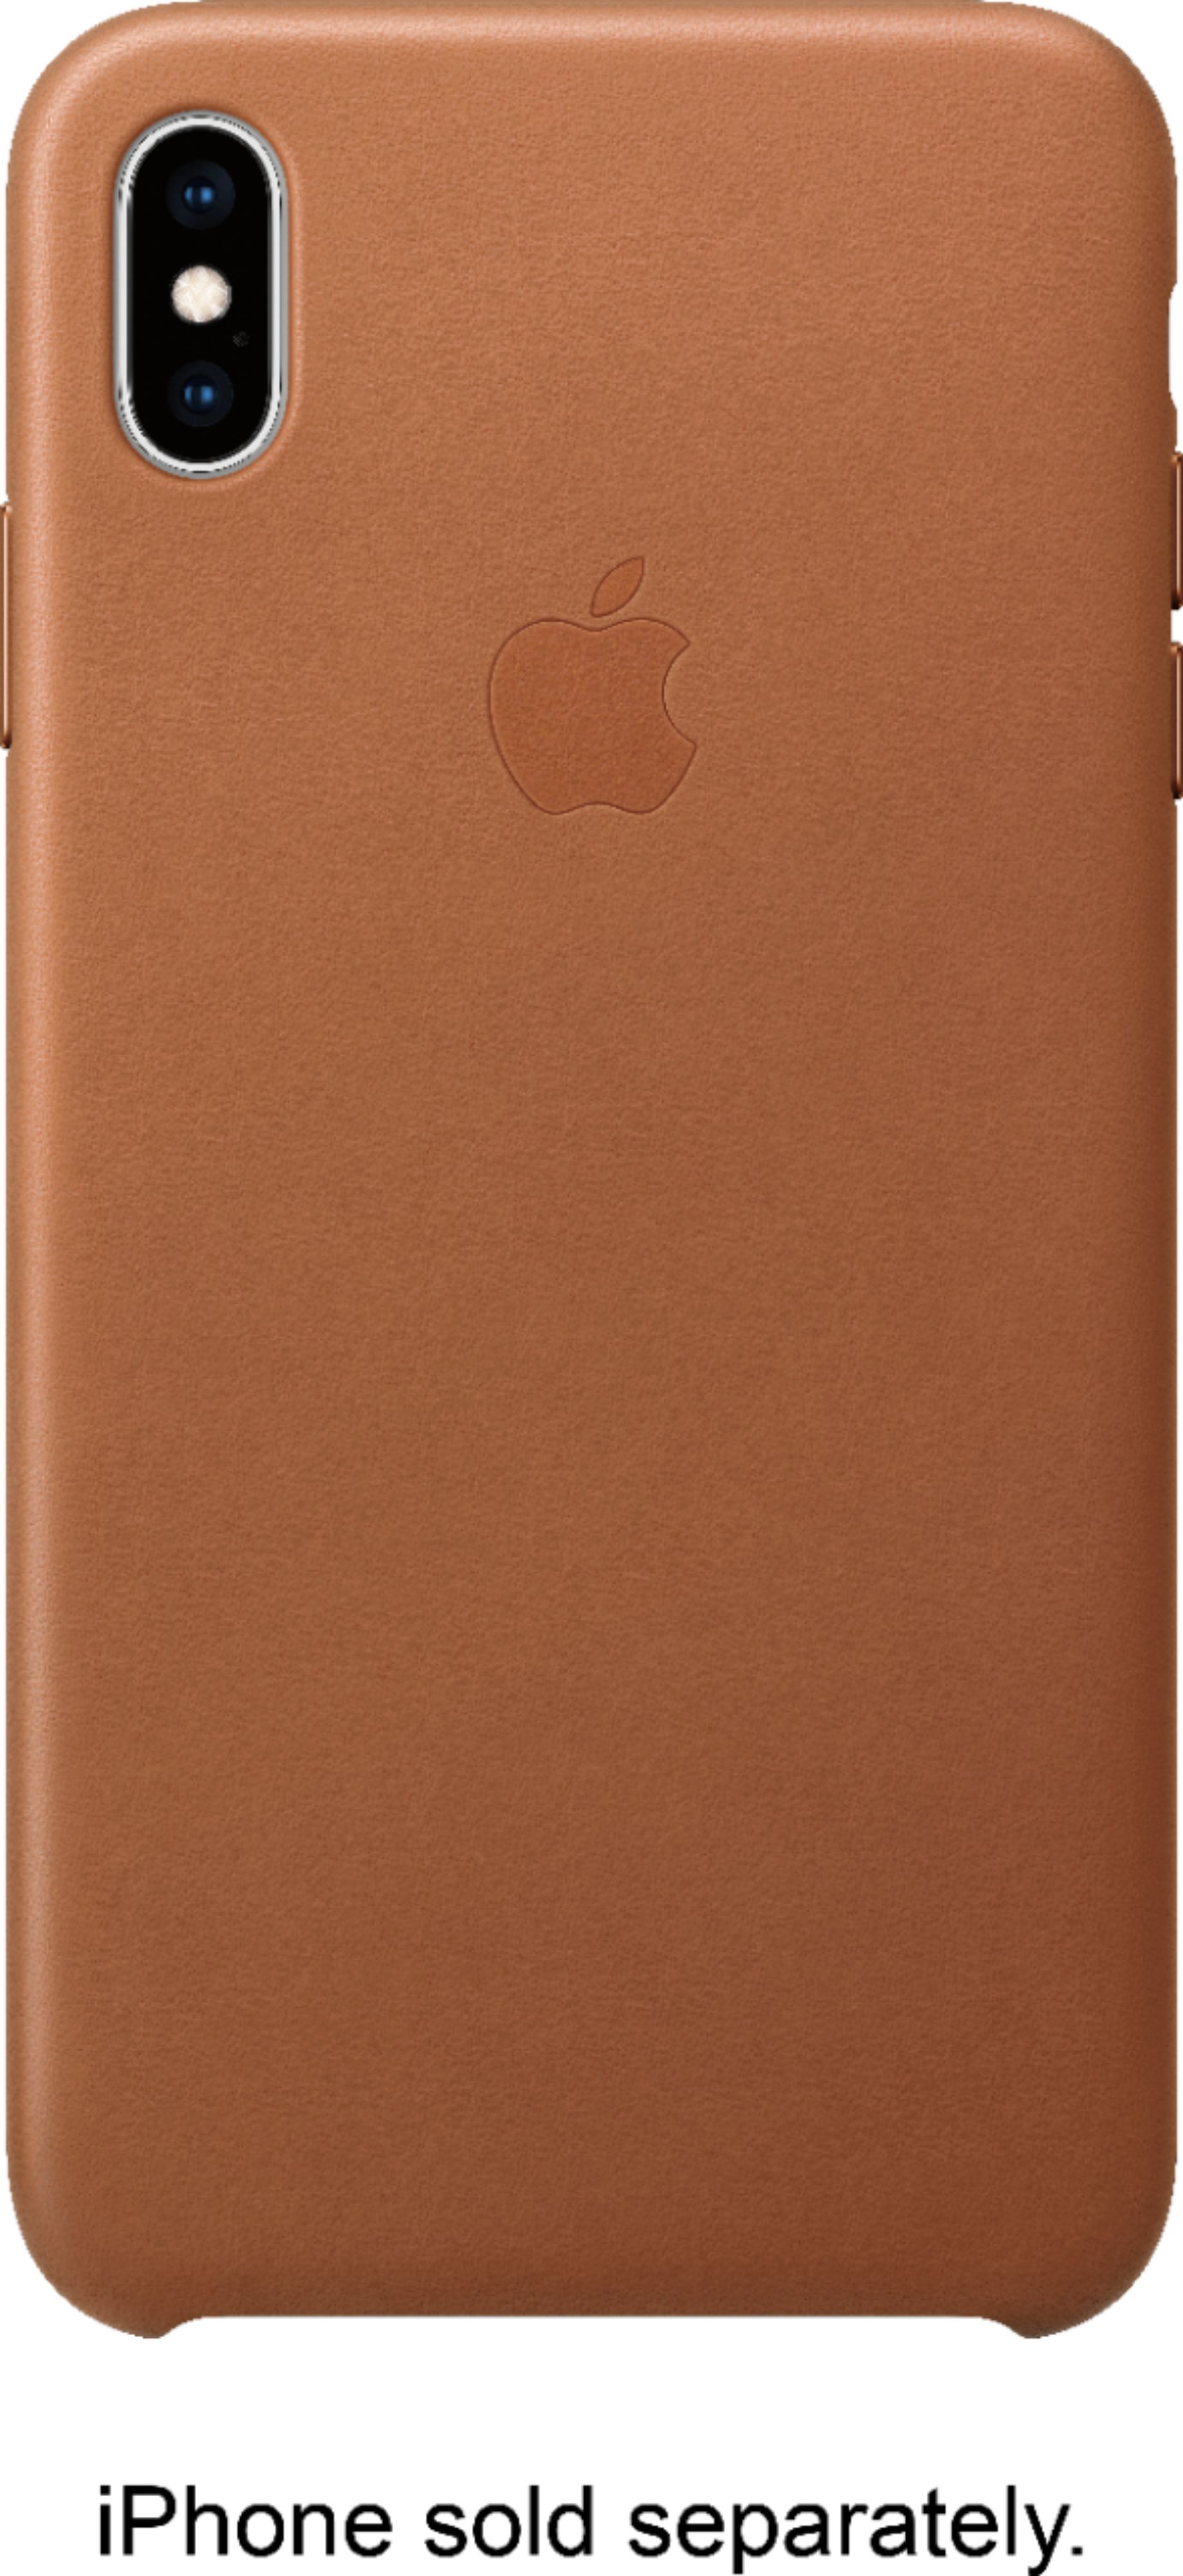 Apple iPhone® XS Max Leather Case Saddle Brown MRWV2ZM/A Best Buy